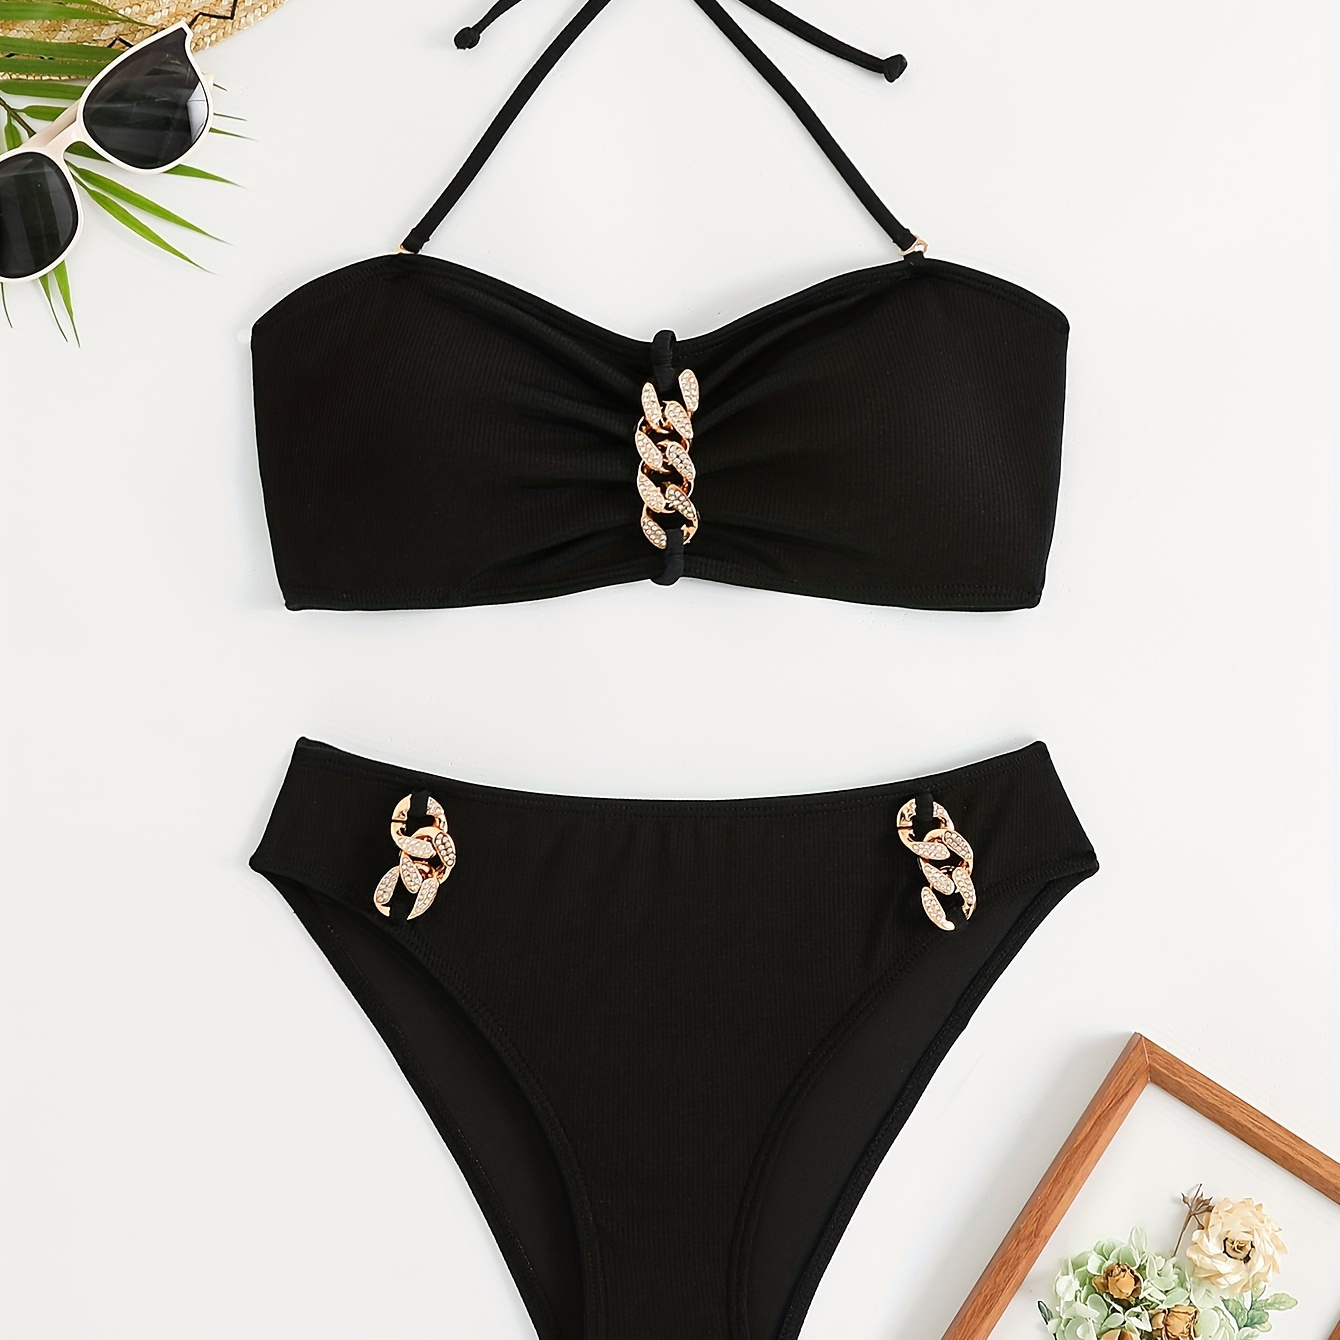 

Women's 2-piece Bikini Set, Ribbed Design With Golden Chain Accents, Halter Neck Top, High Cut Bottoms, Sexy Swimsuit For Summer Beachwear